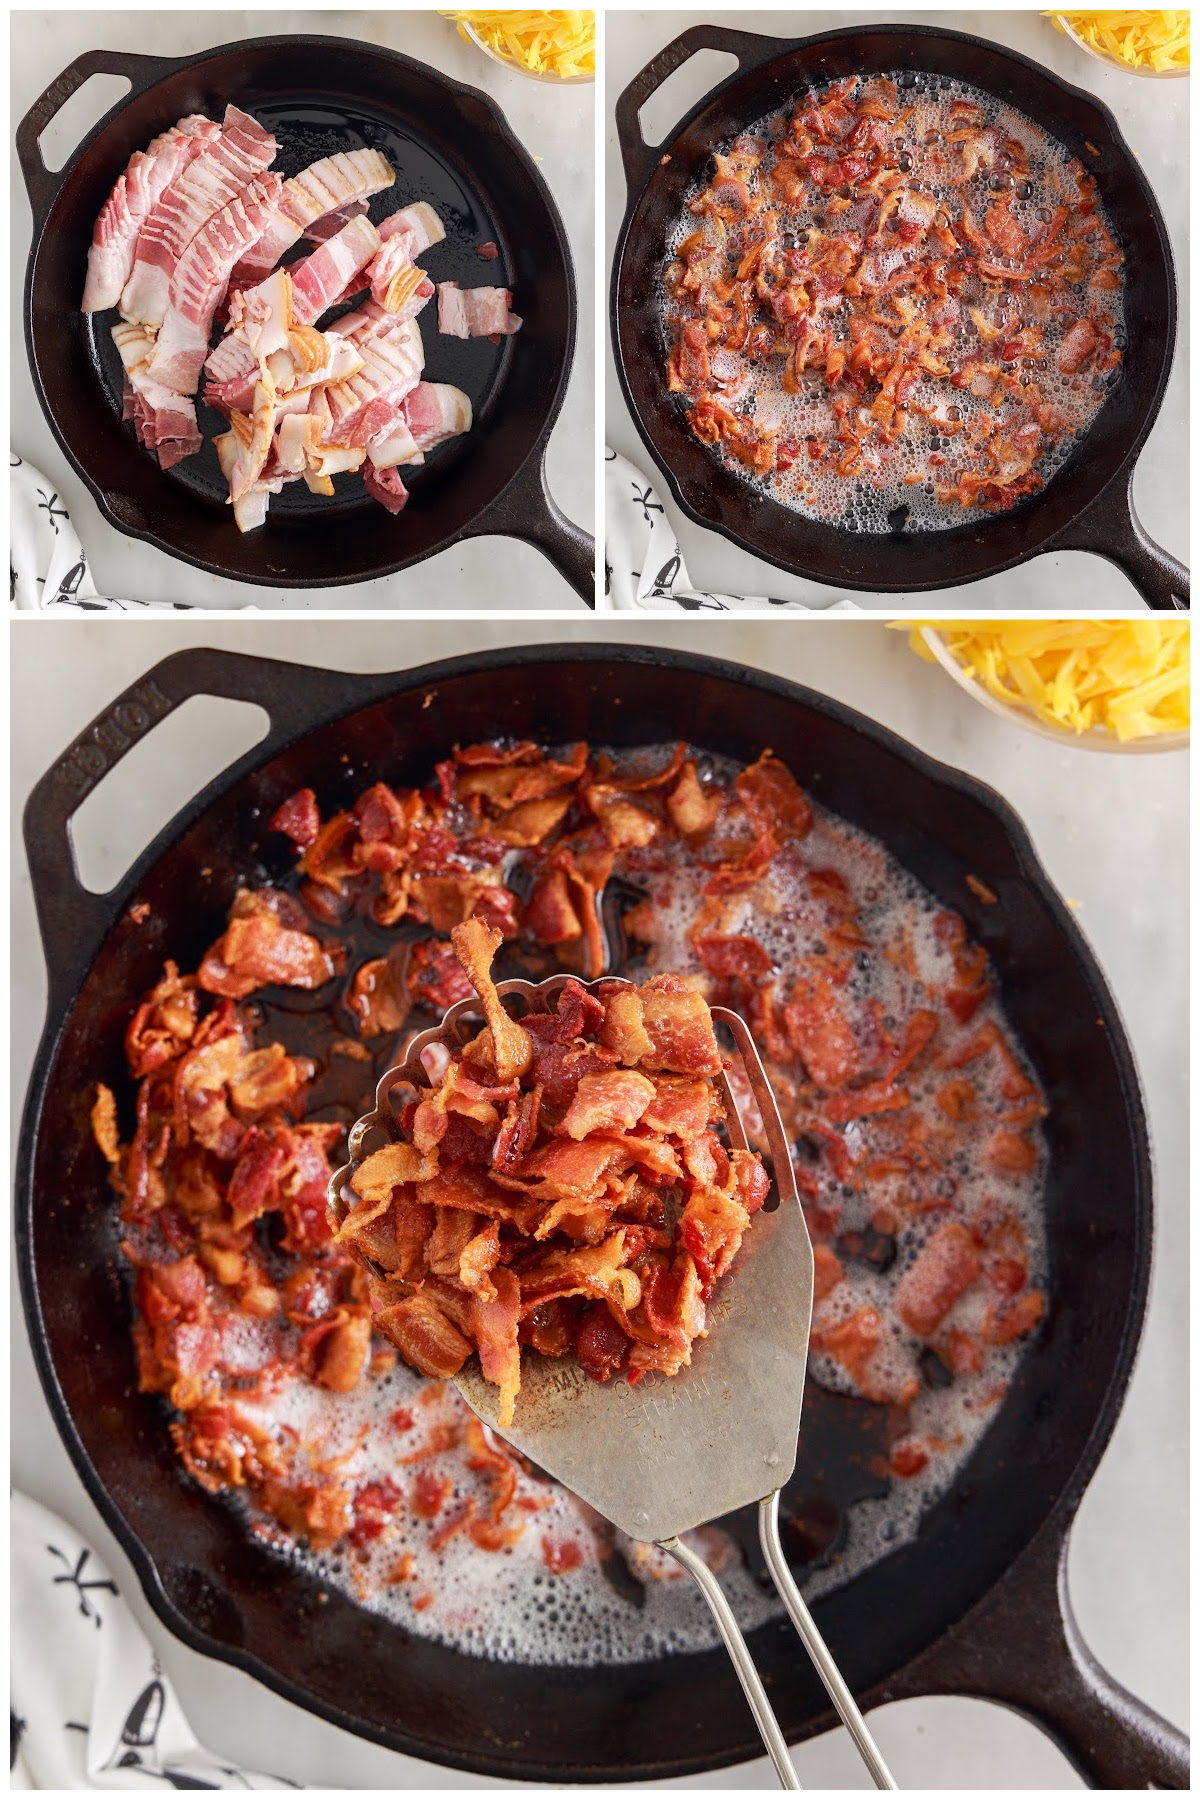 Chopped bacon pieces raw and then cooked in cast iron skillet.